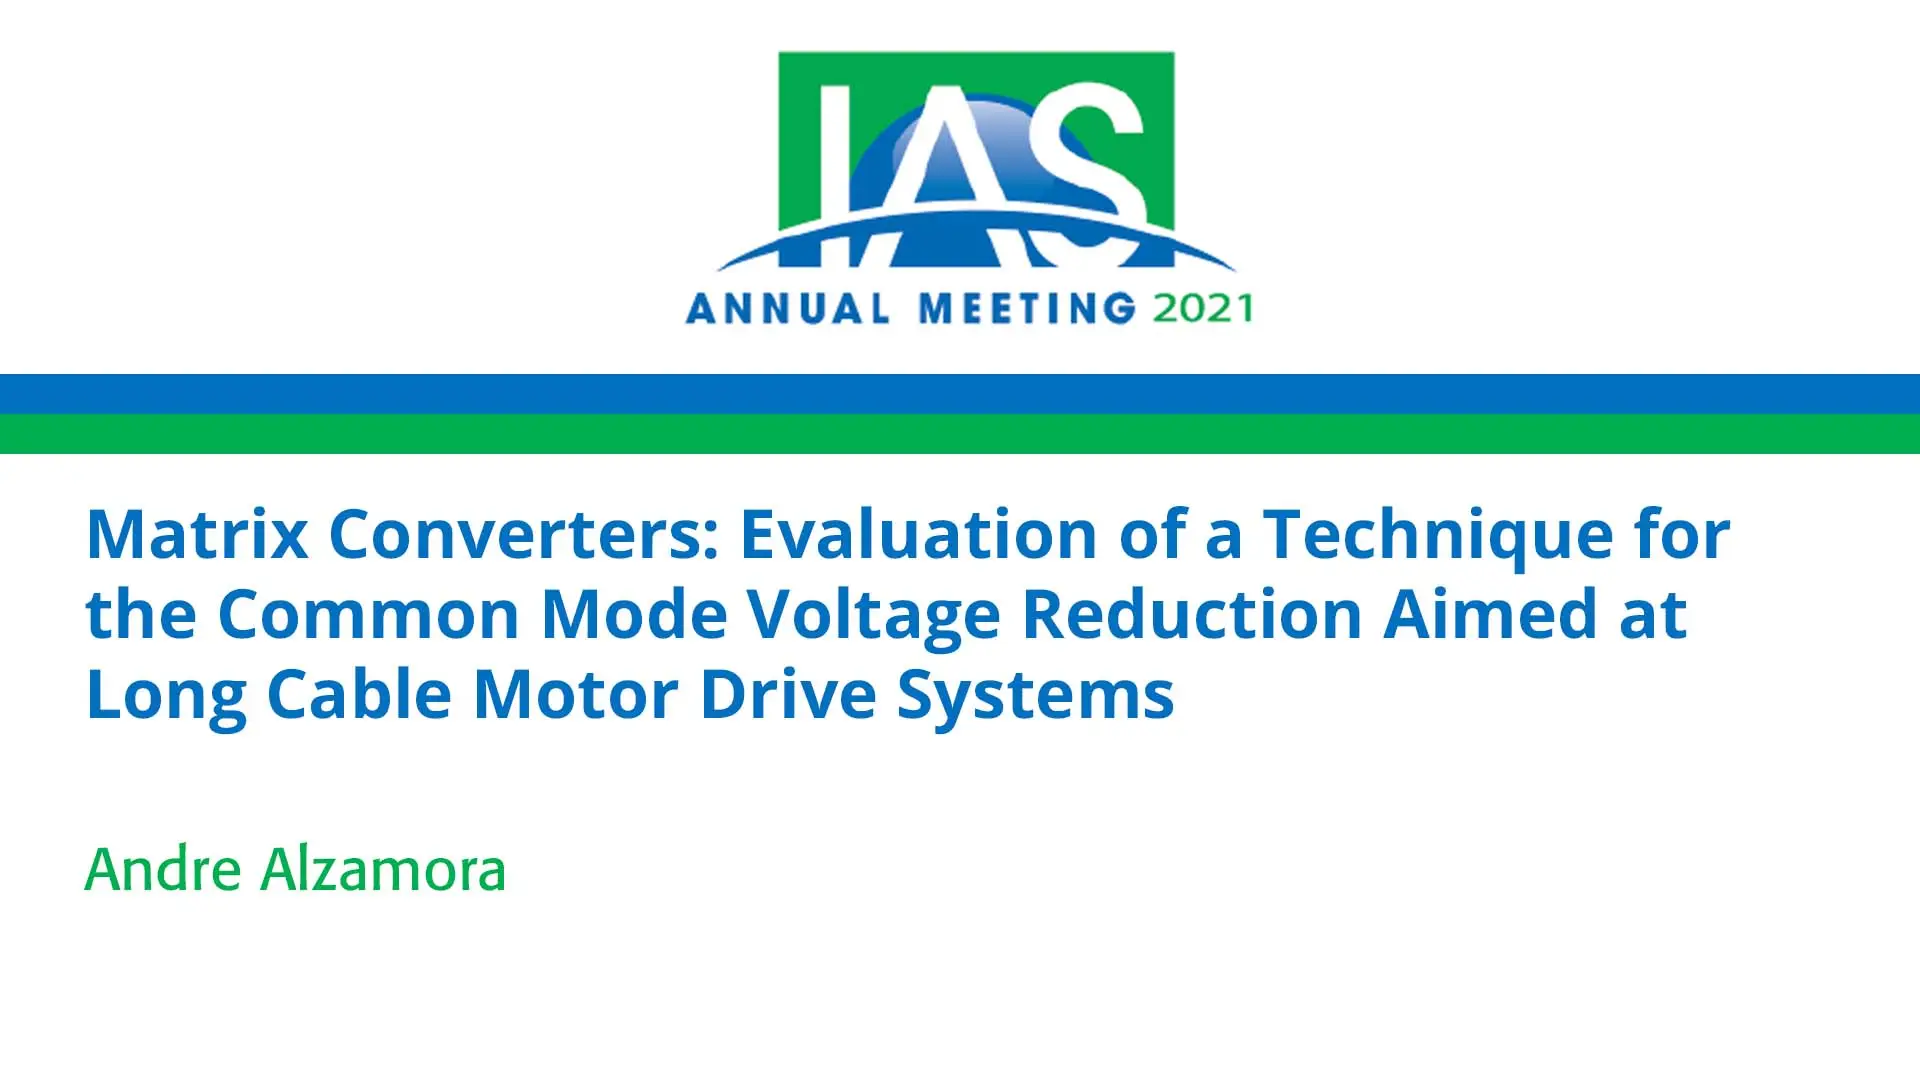 Matrix Converters: Evaluation of a Technique for the Common Mode Voltage Reduction Aimed at Long Cable Motor Drive Systems